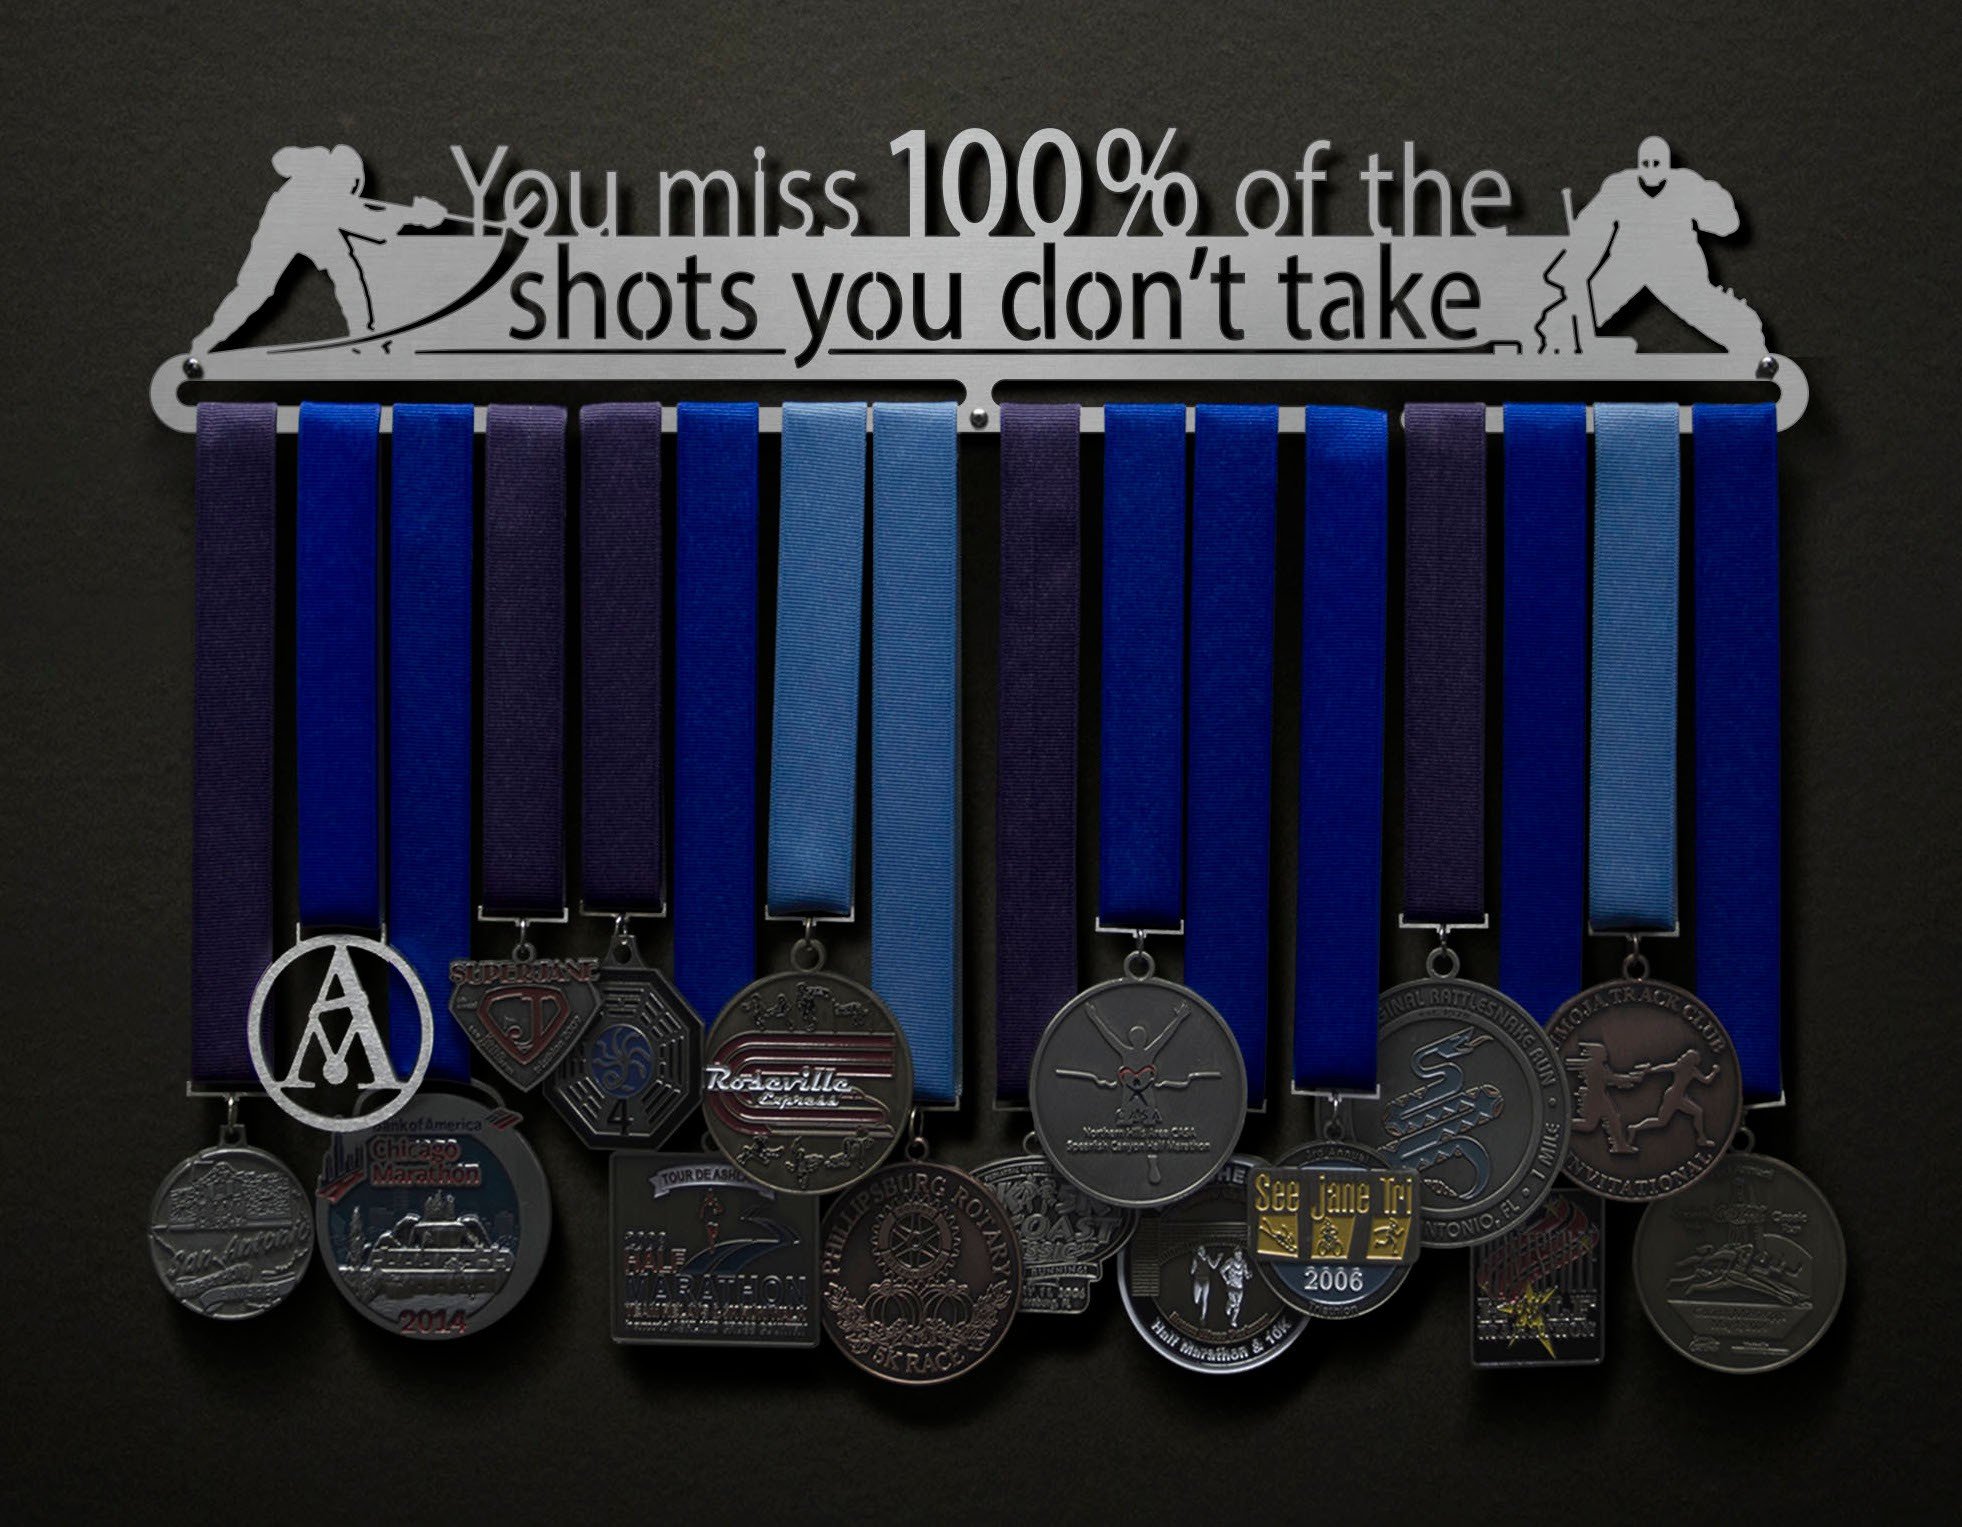 Hockey: You Miss 100% of the Shots You Don't Take